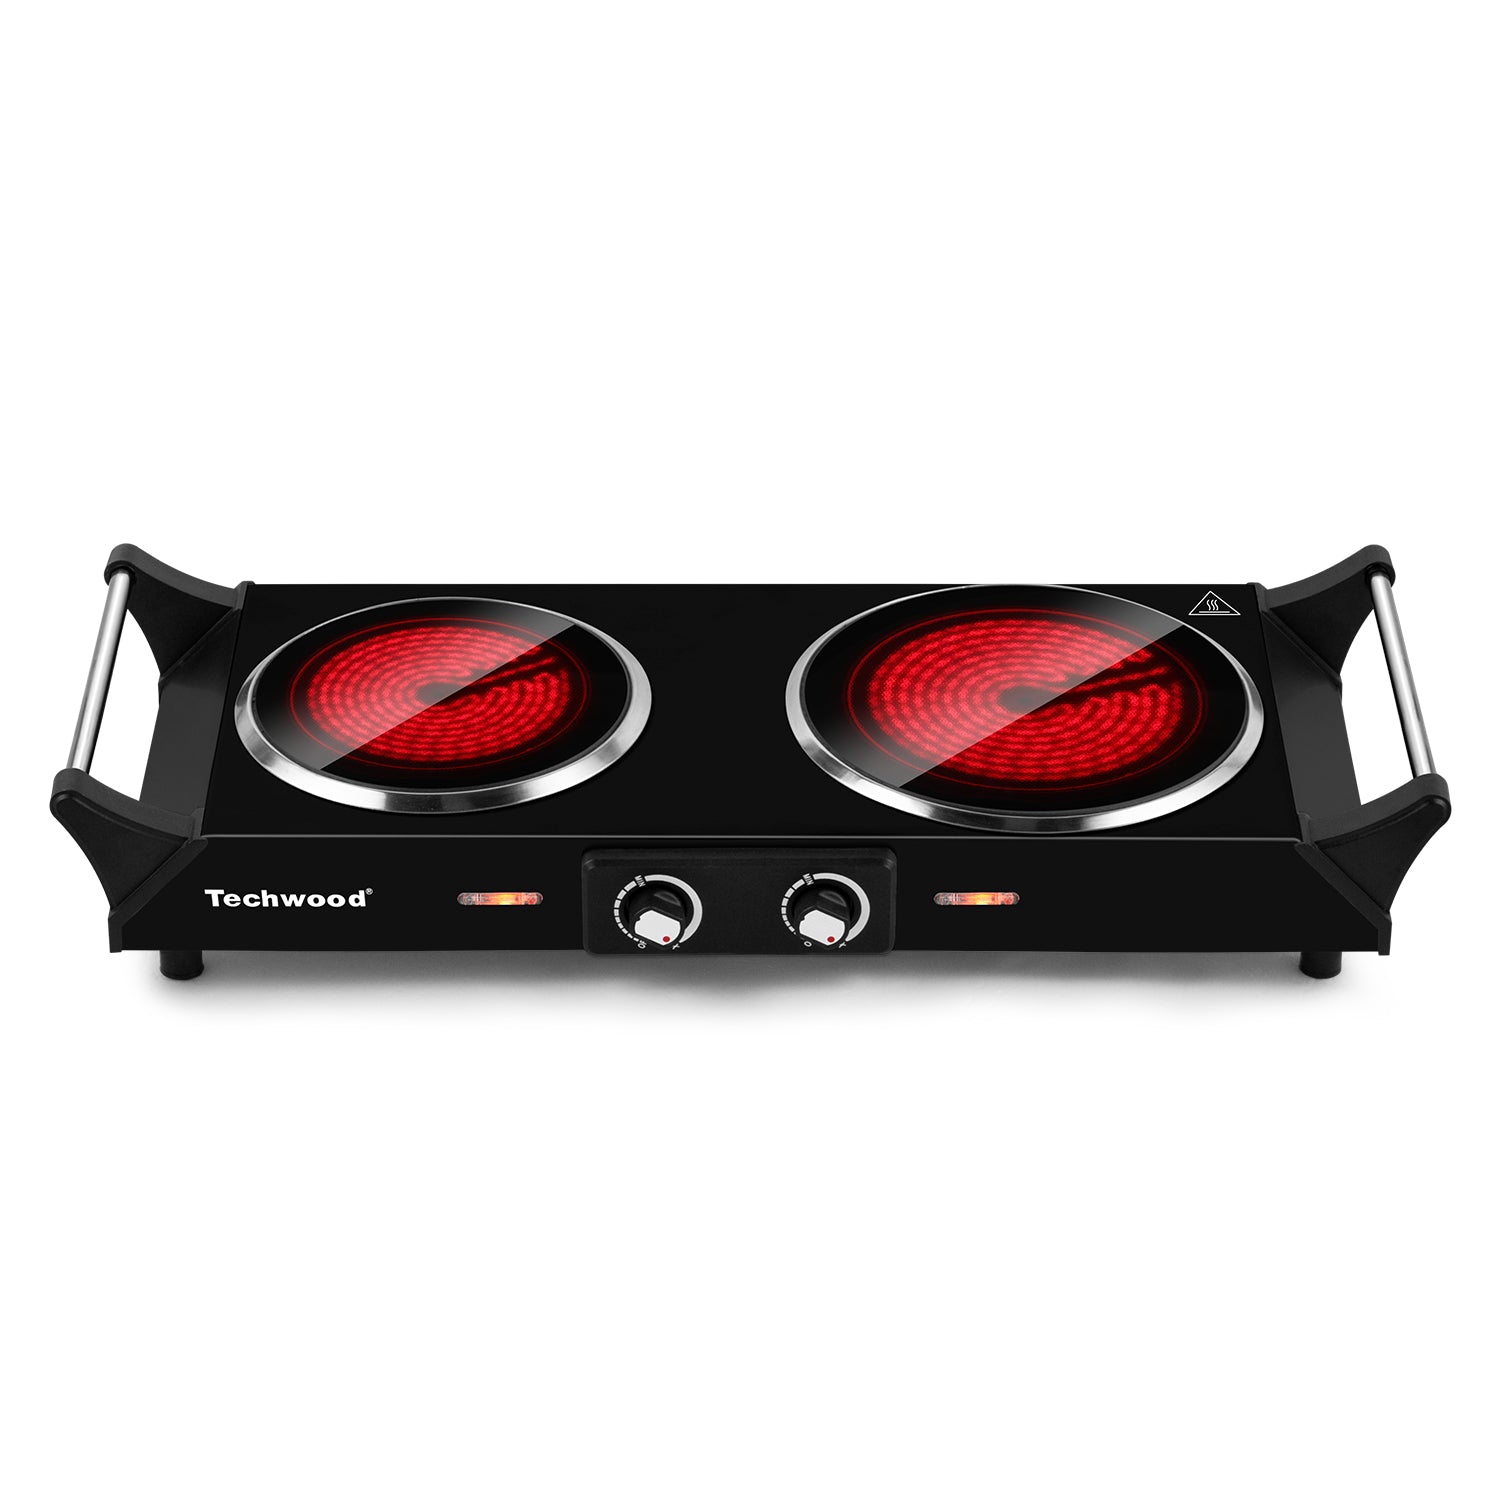 Techwood 1800W Electric Hot Plate, Countertop Stove Double Burner for  Cooking, Infrared Ceramic Hot Plates Double Cooktop, Brushed Stainless  Steel